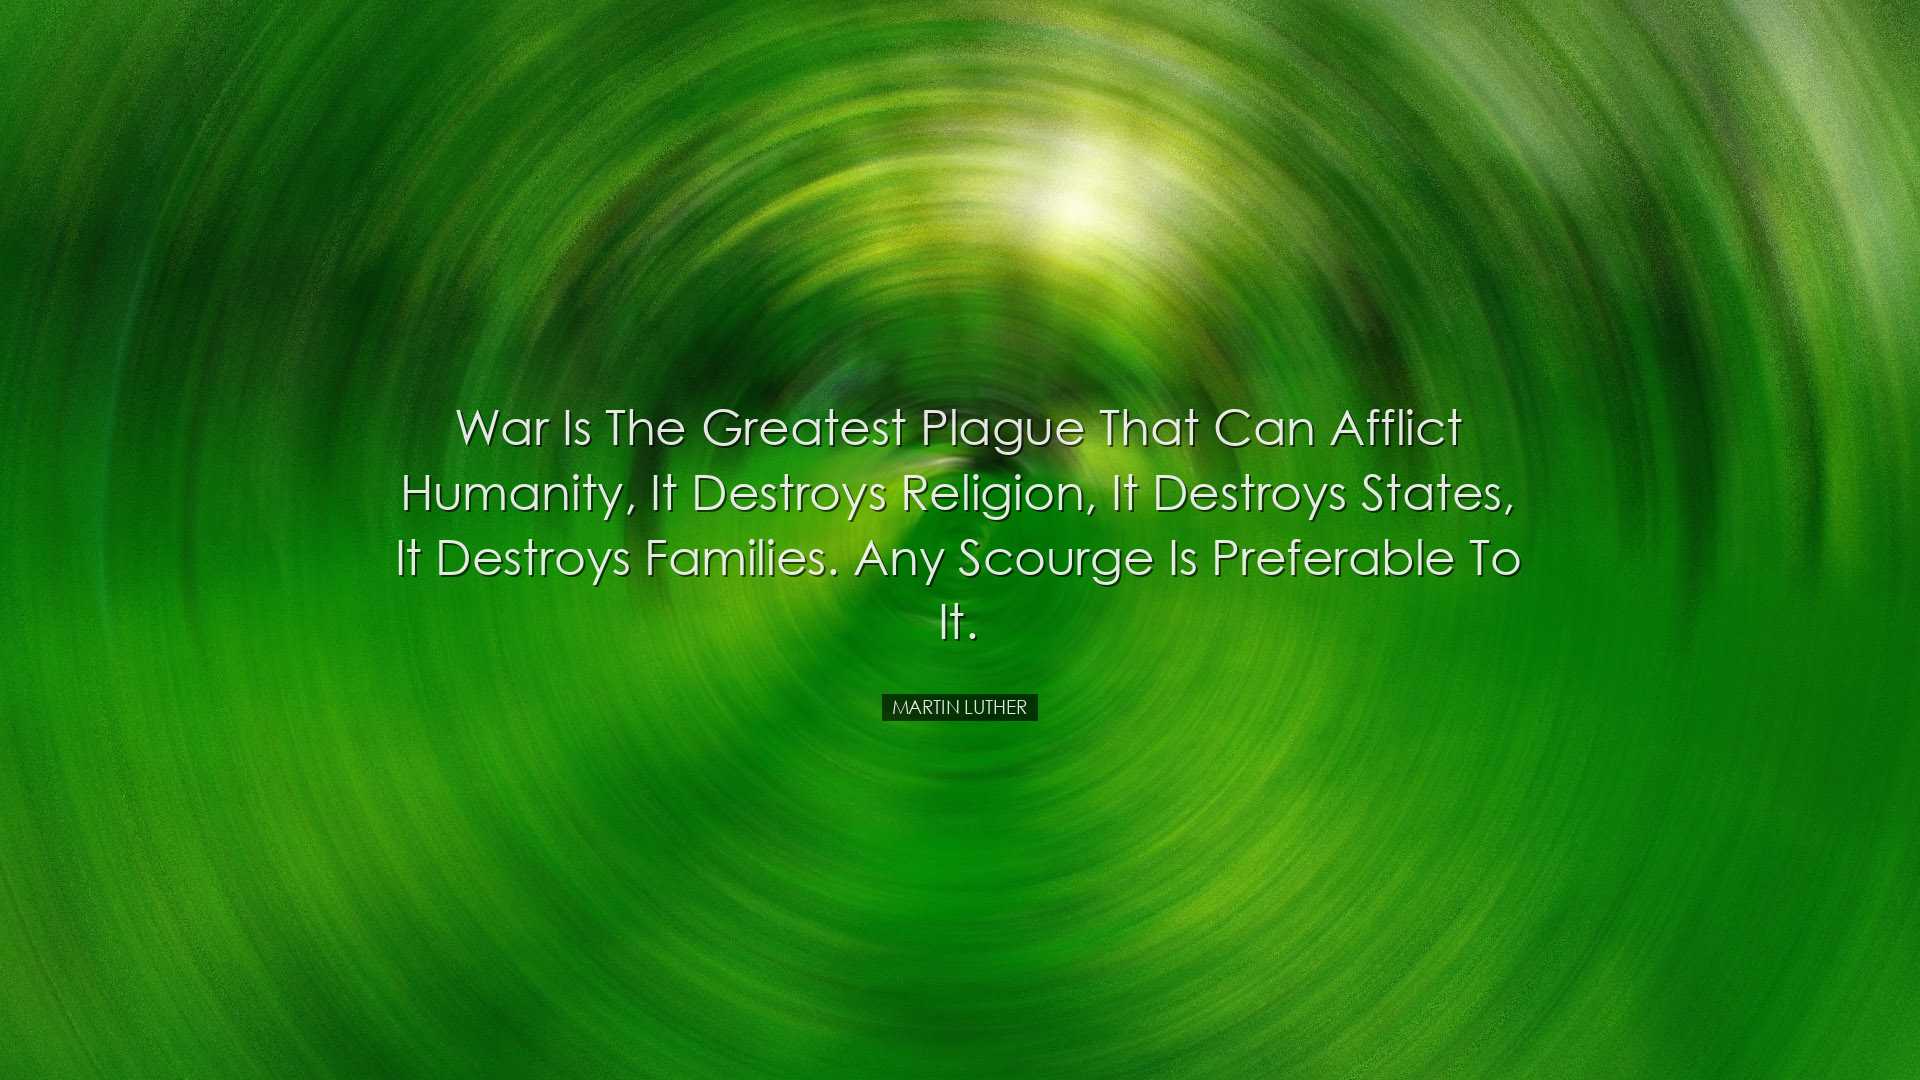 War is the greatest plague that can afflict humanity, it destroys